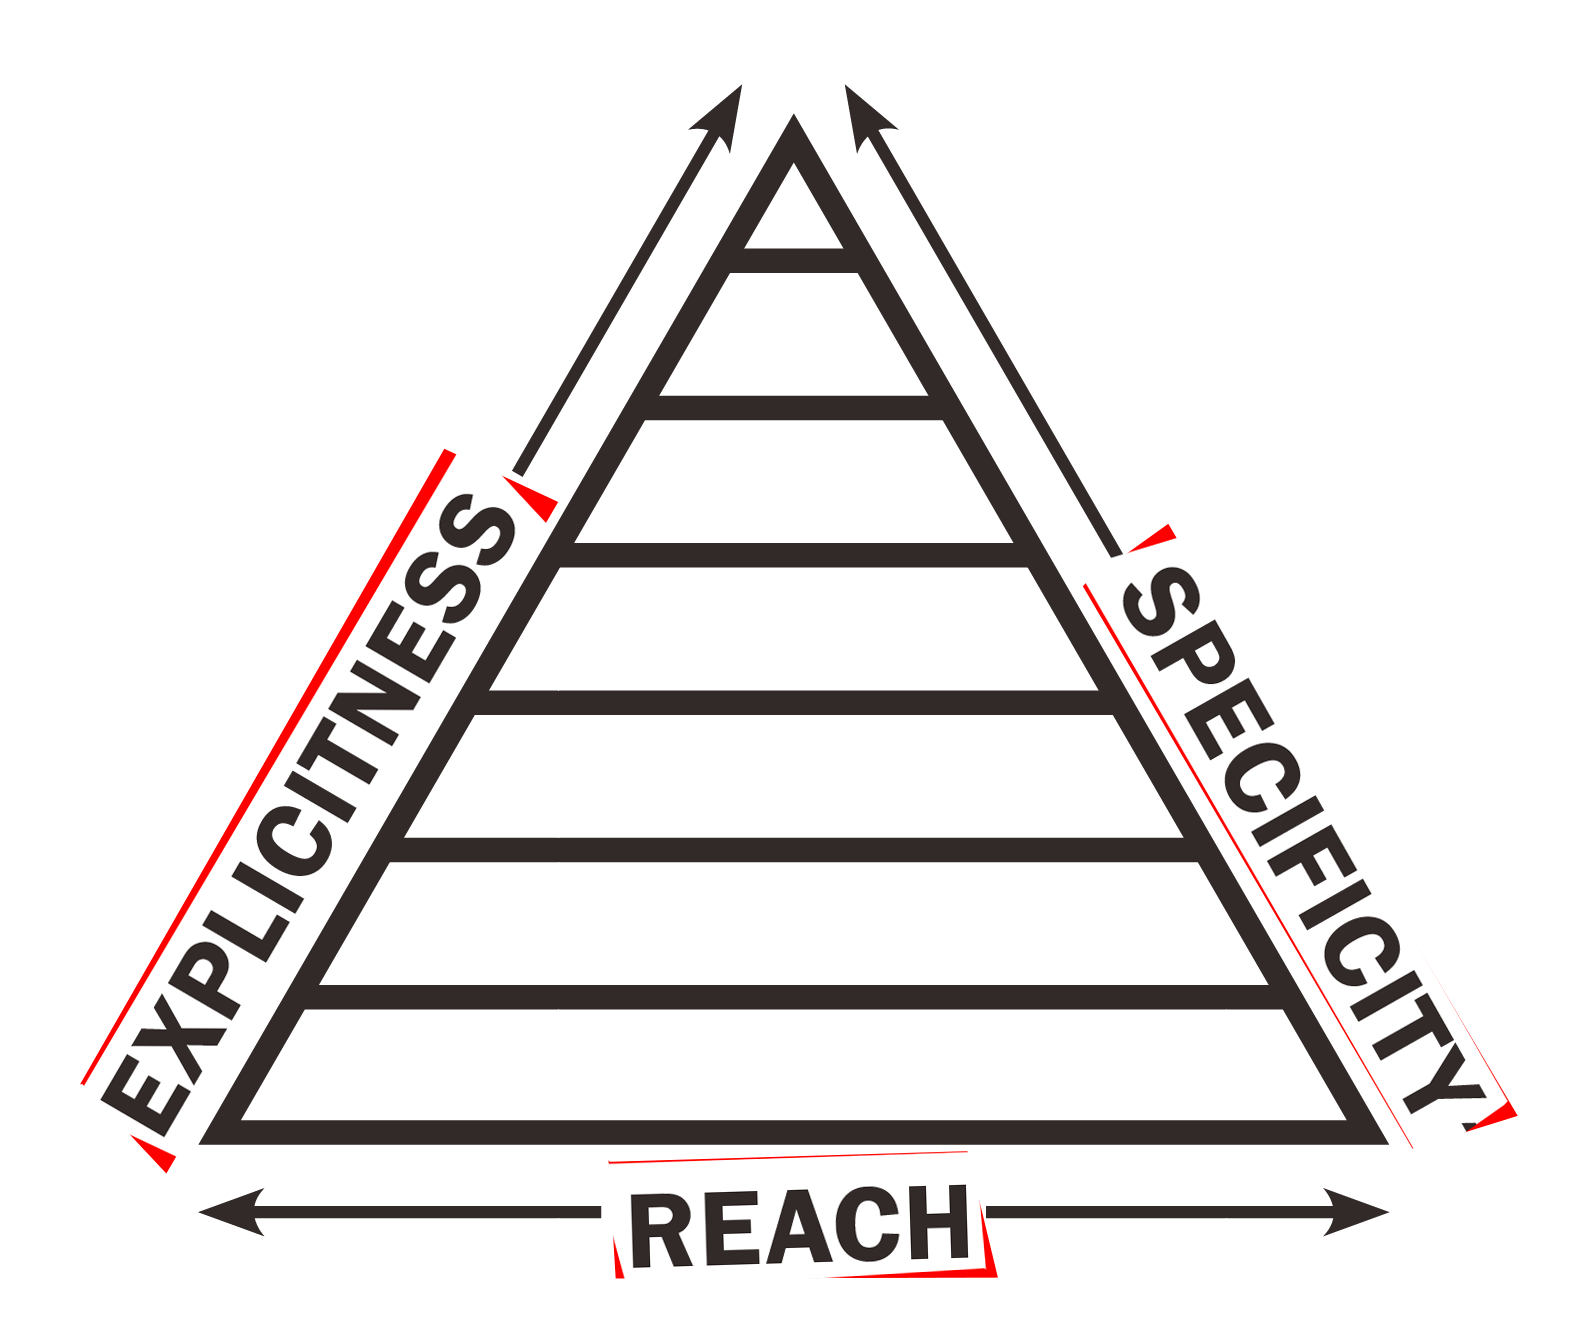 Triangle with
the horizontal edge labeled 'reach',
and the vertical edges
labeled 'specificity' and 'explicitness'
